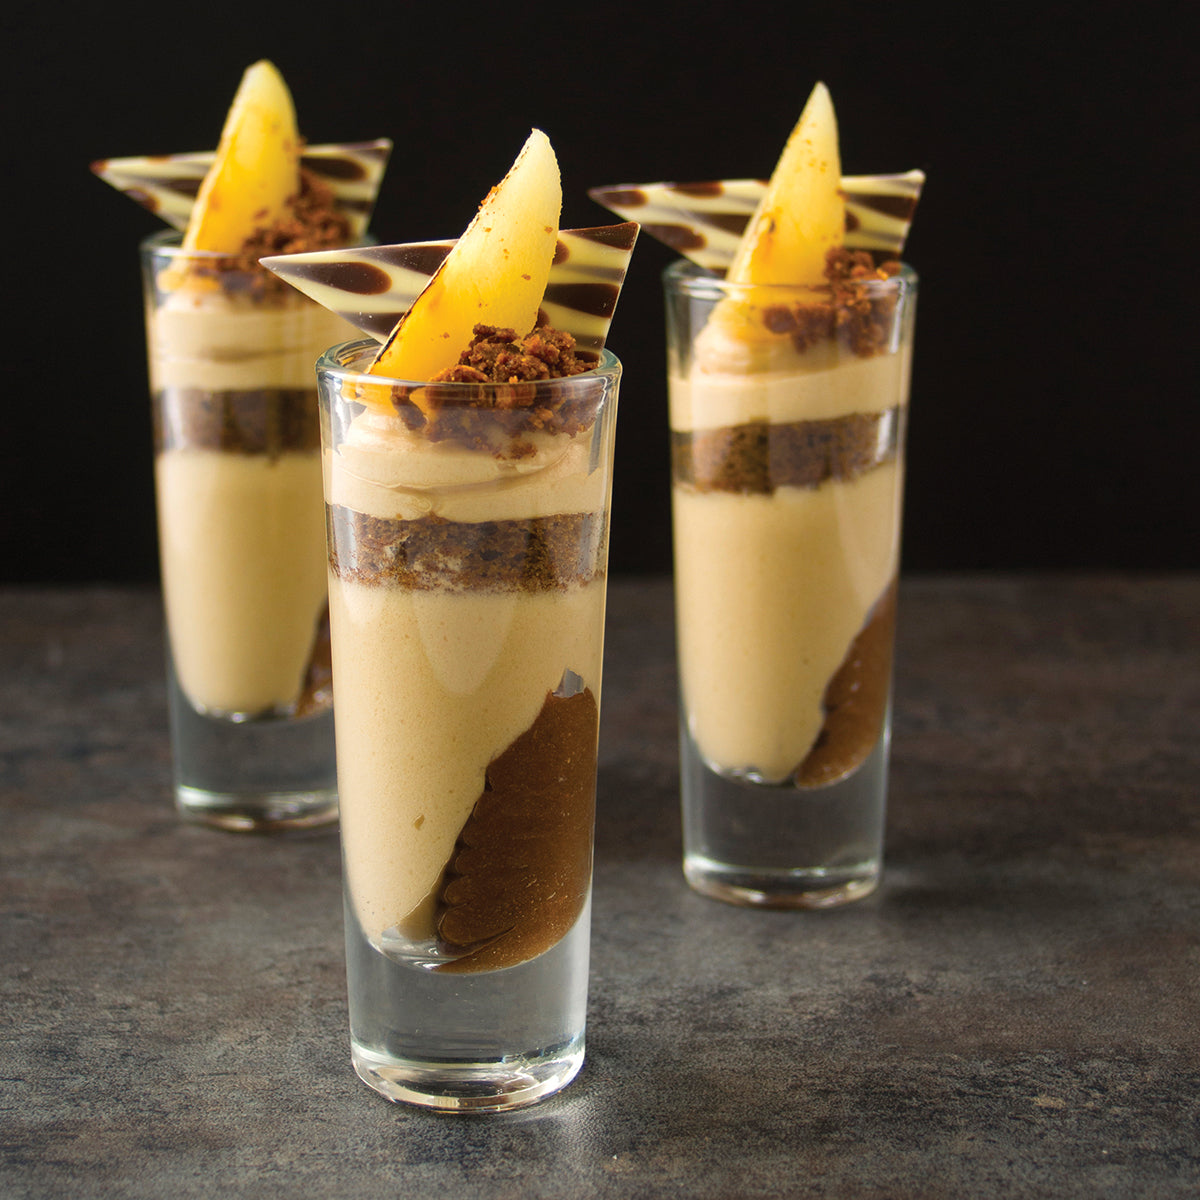 Layered parfait of caramel soaked sponge and pear flavored mousse